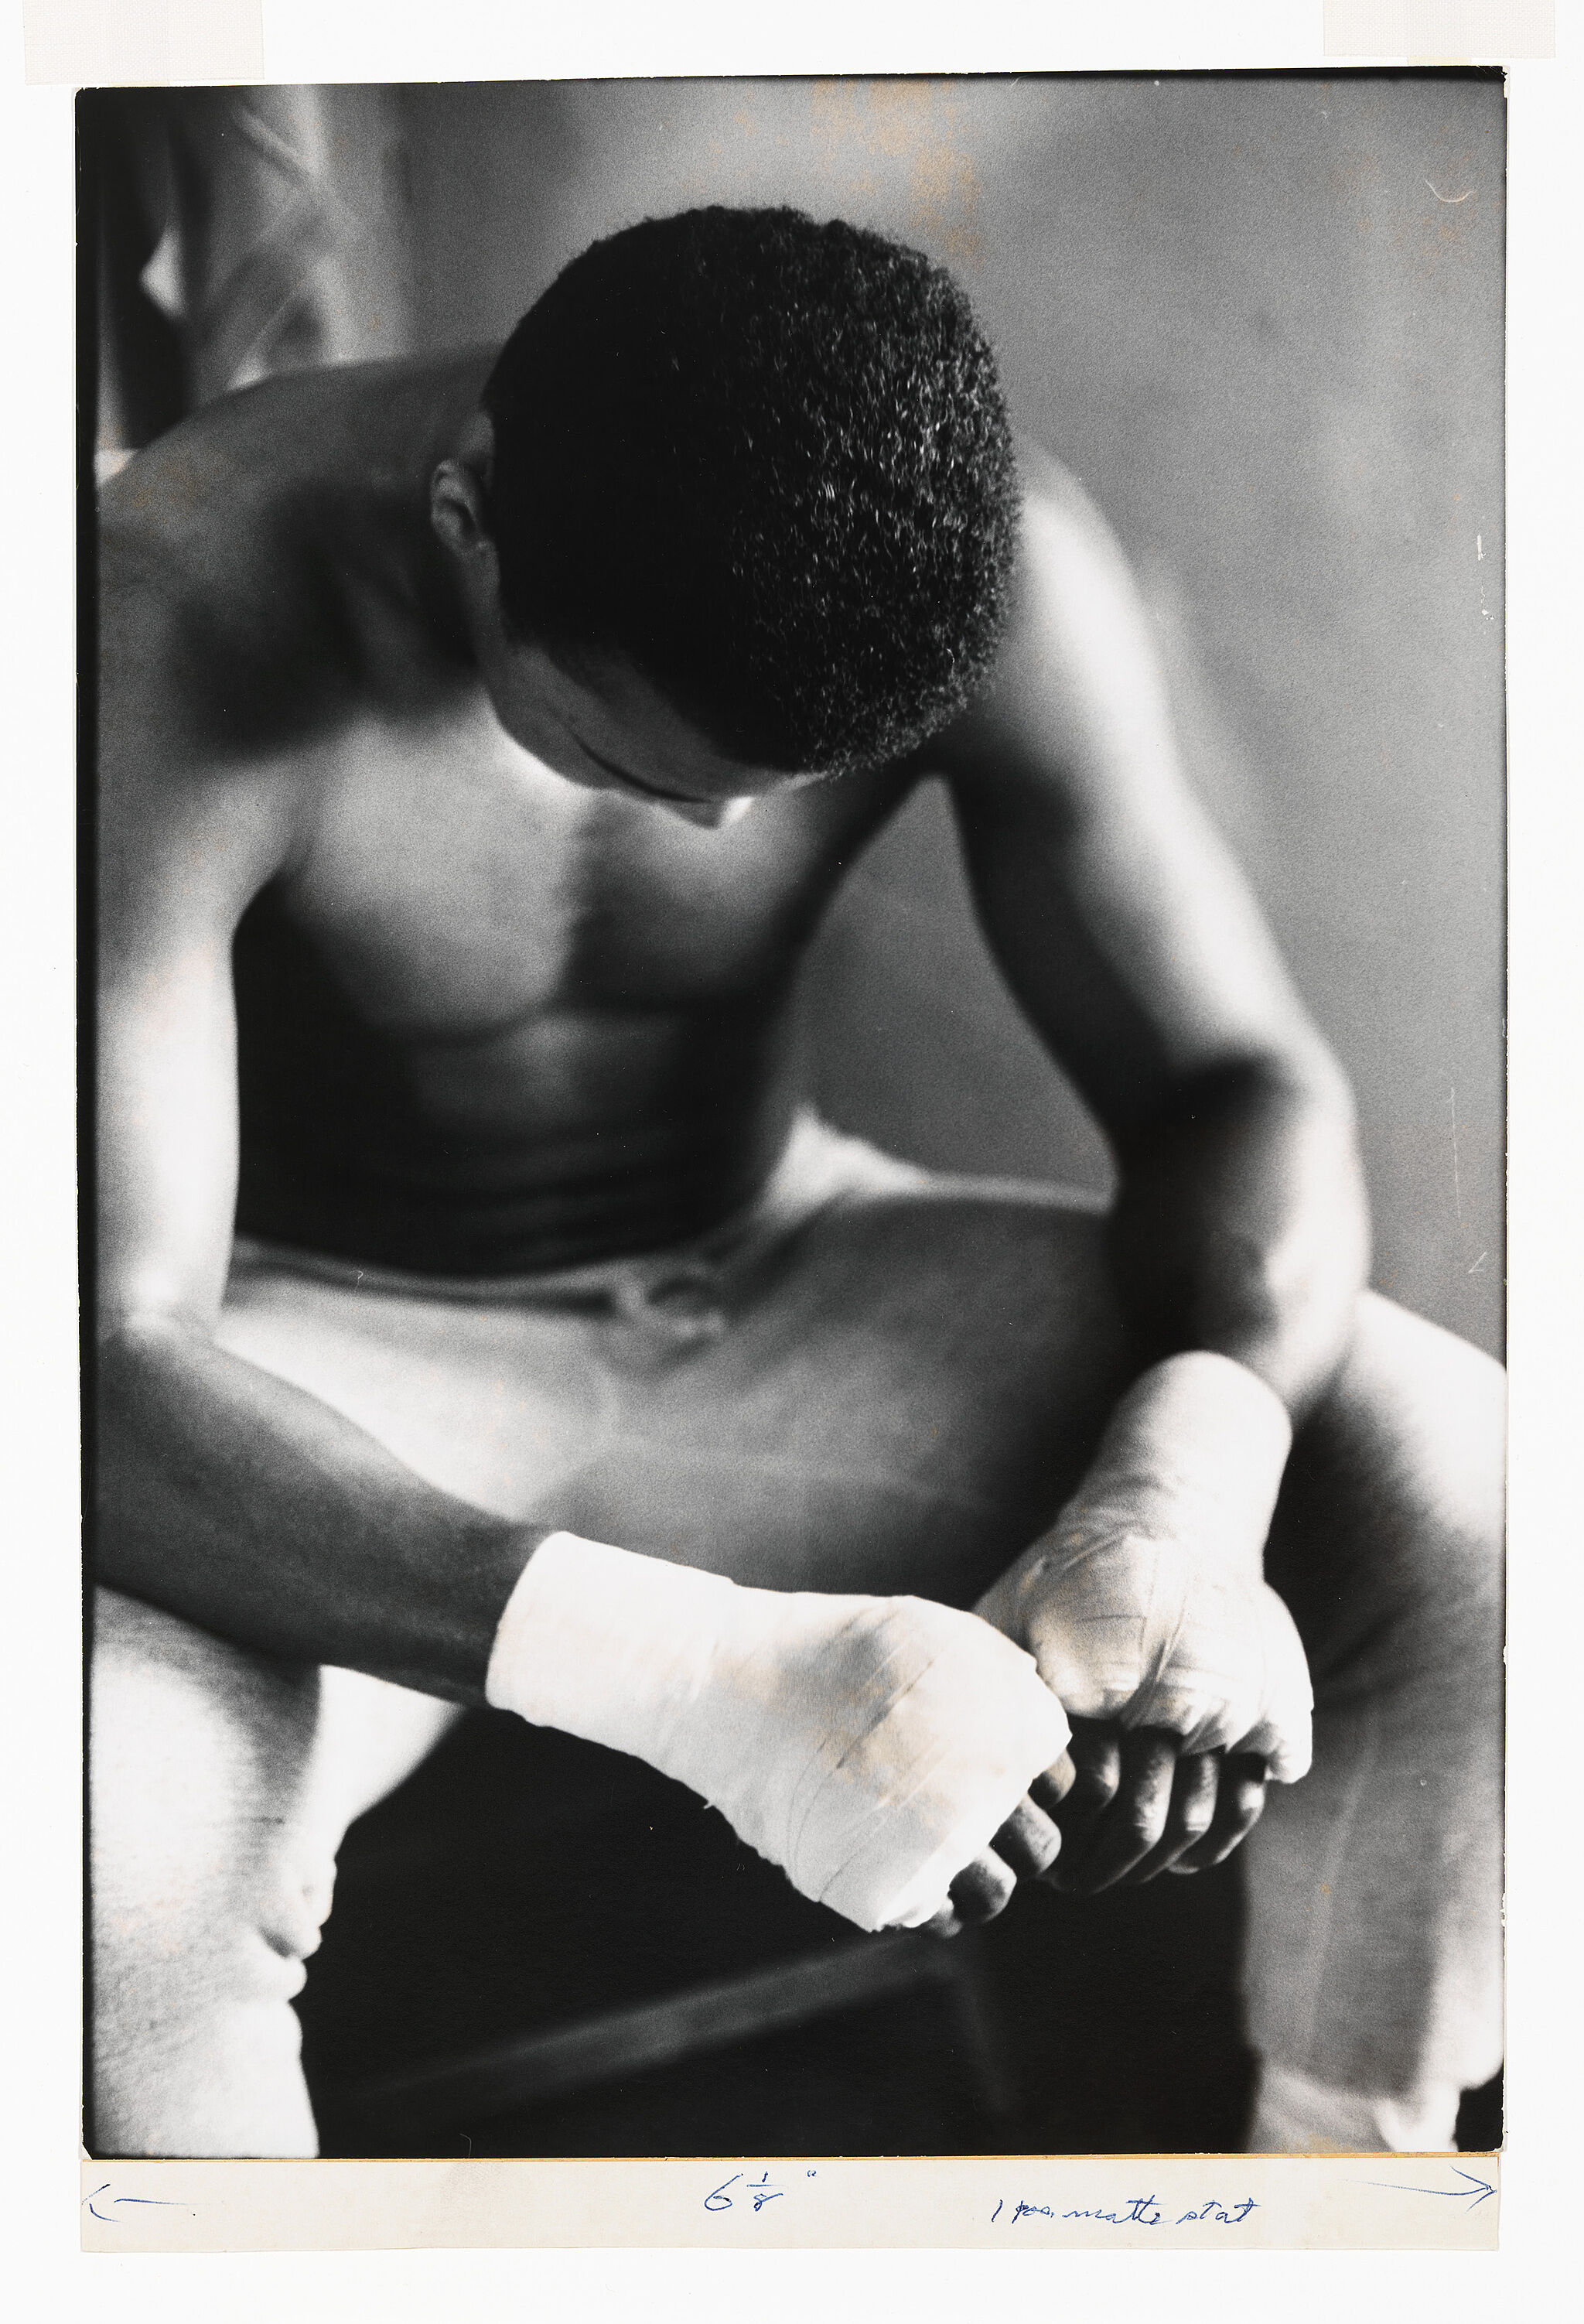 Black and white photograph of Muhammad Ali with bandaged hands.